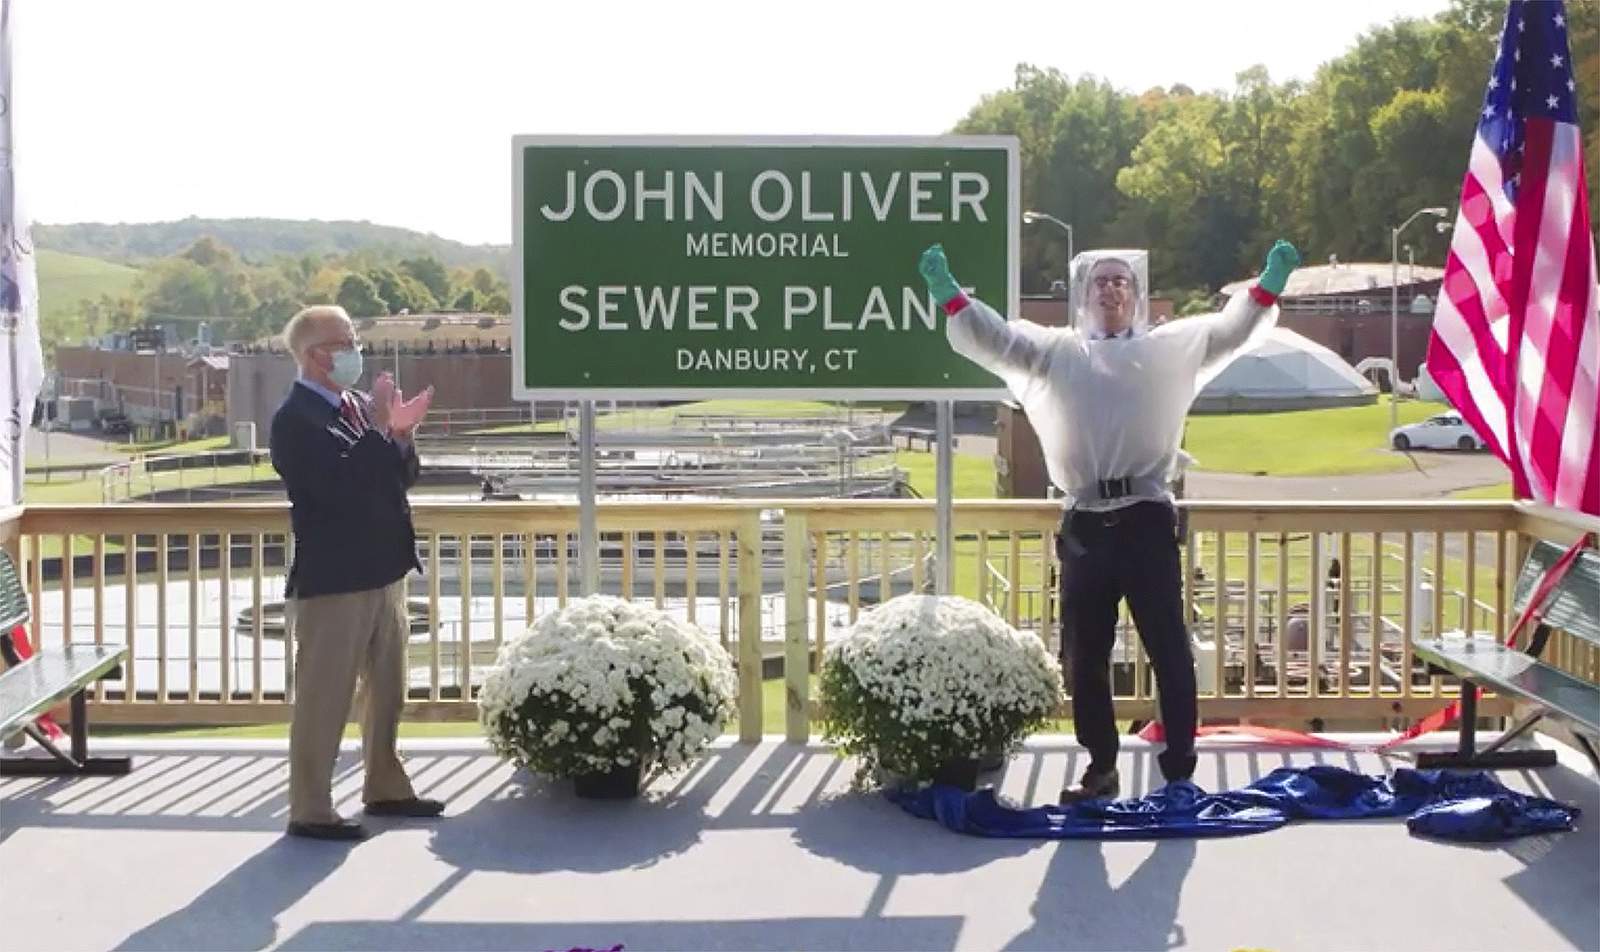 John Oliver now has a sewage plant named after him